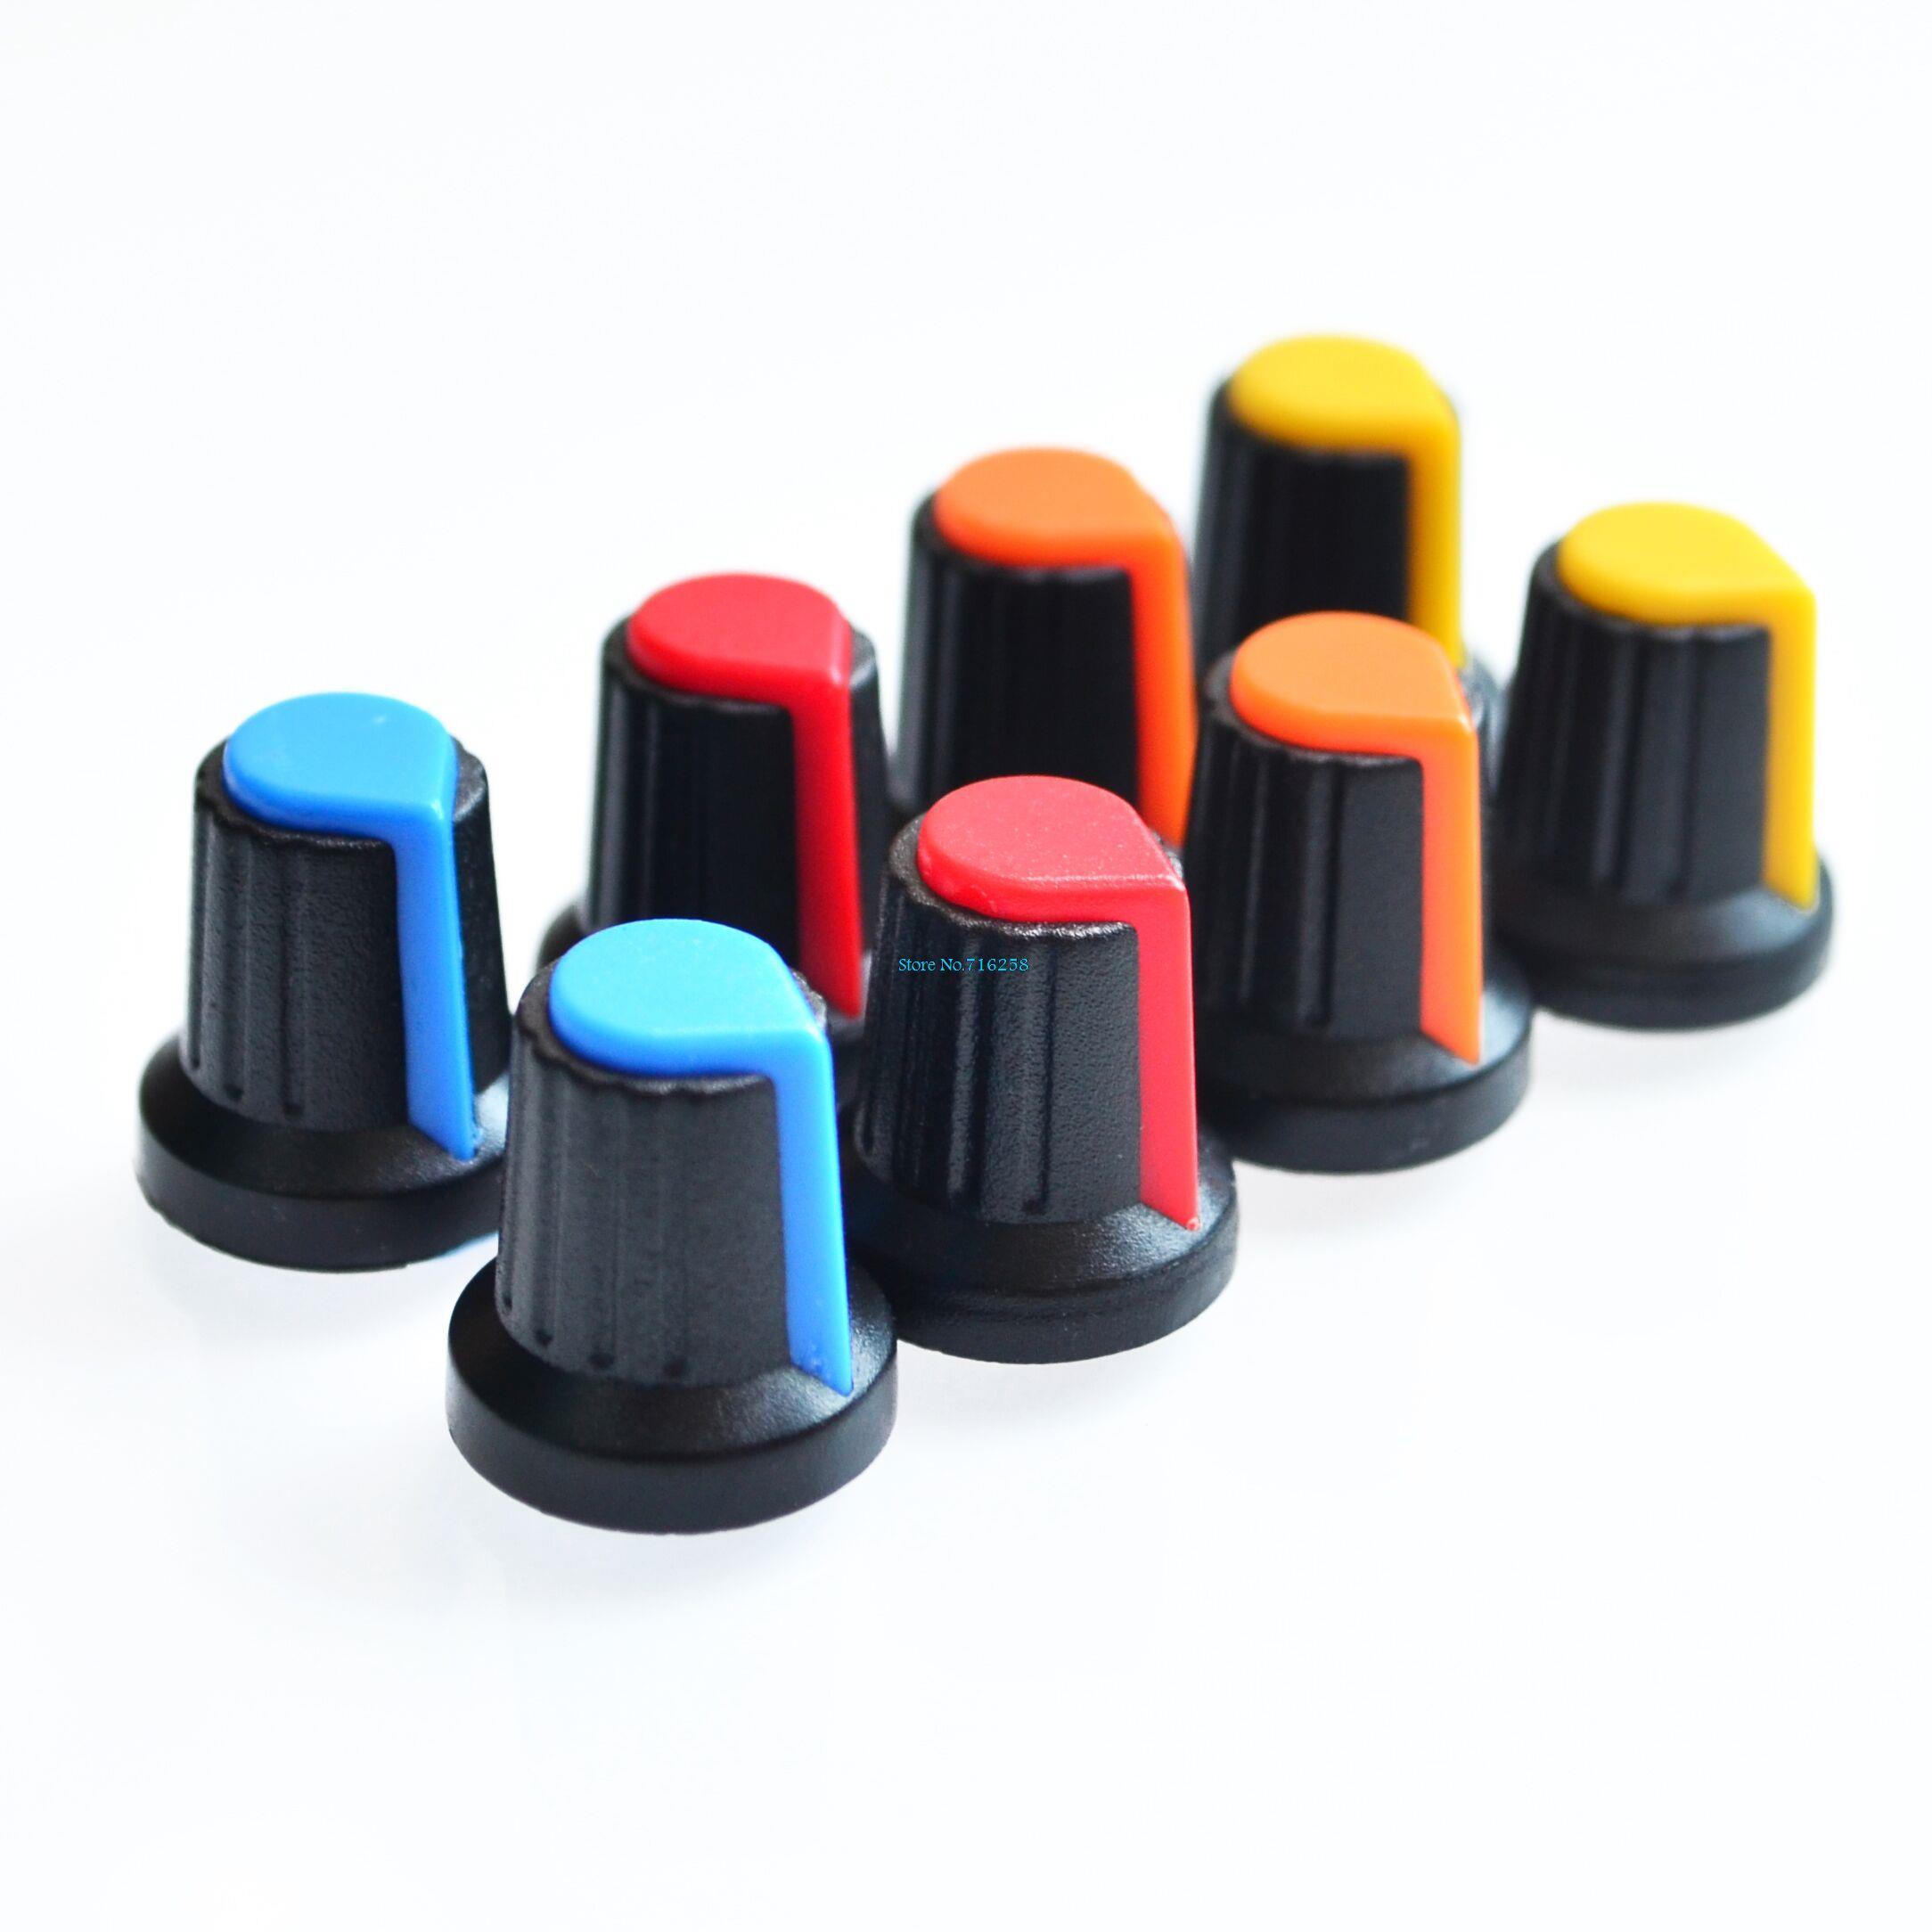 50Pcs-High-quality-plastic-potentiometers-knobs-Knob-for-single-double-potentiometers